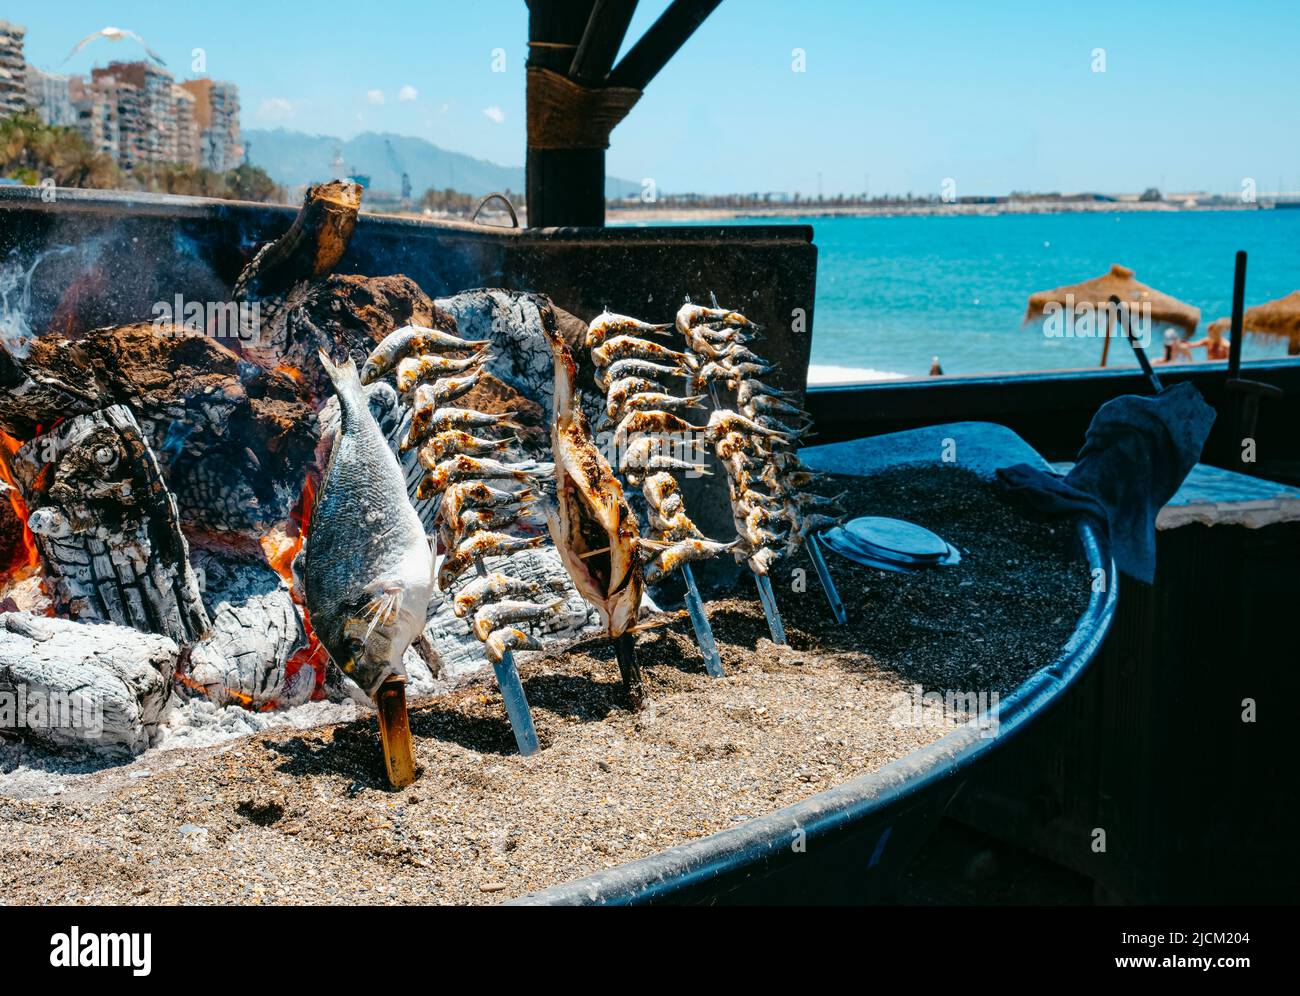 closeup of some espetos, a kind of skewers where fish is skewered, beeing cooked in a wood fire, as is traditional in Malaga, in La Malagueta beach, M Stock Photo